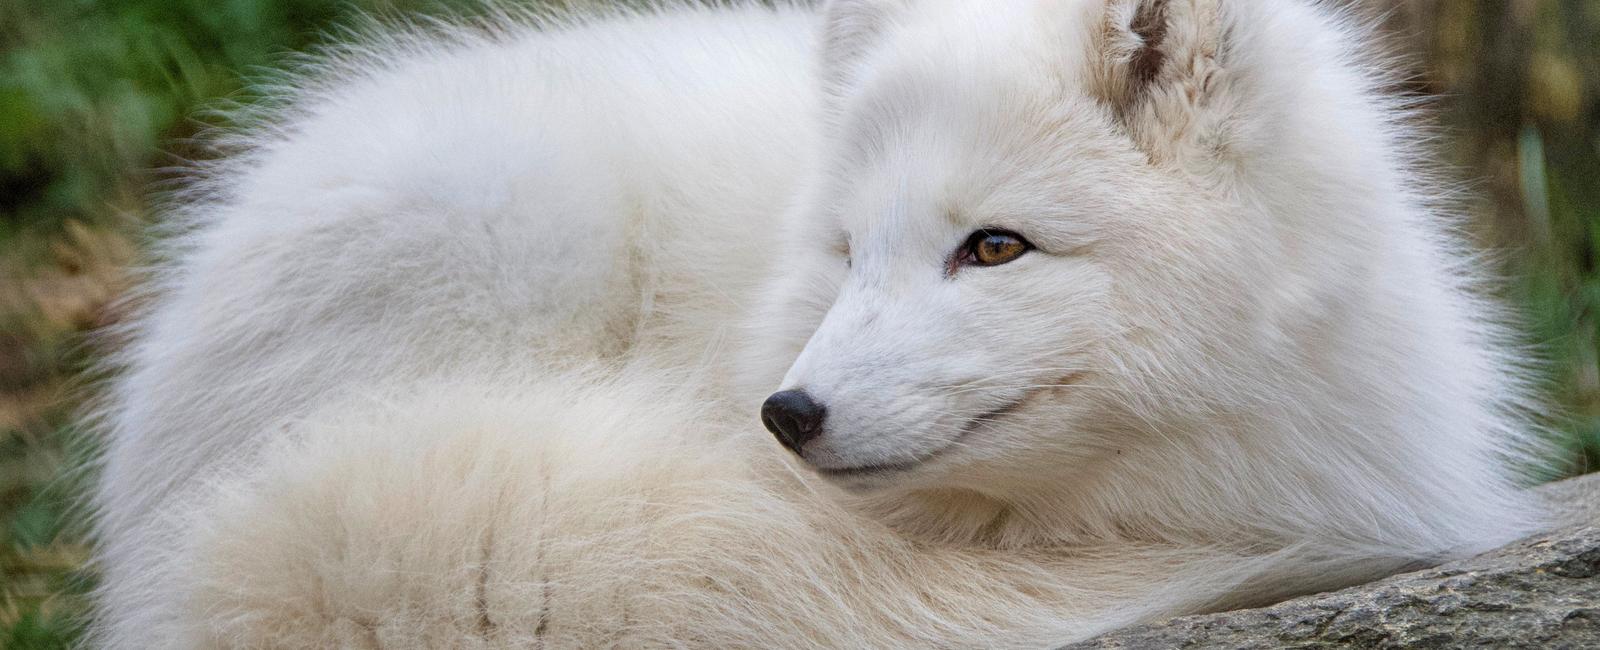 Arctic foxes use their thick fuzzy tail to cover themselves to keep warm